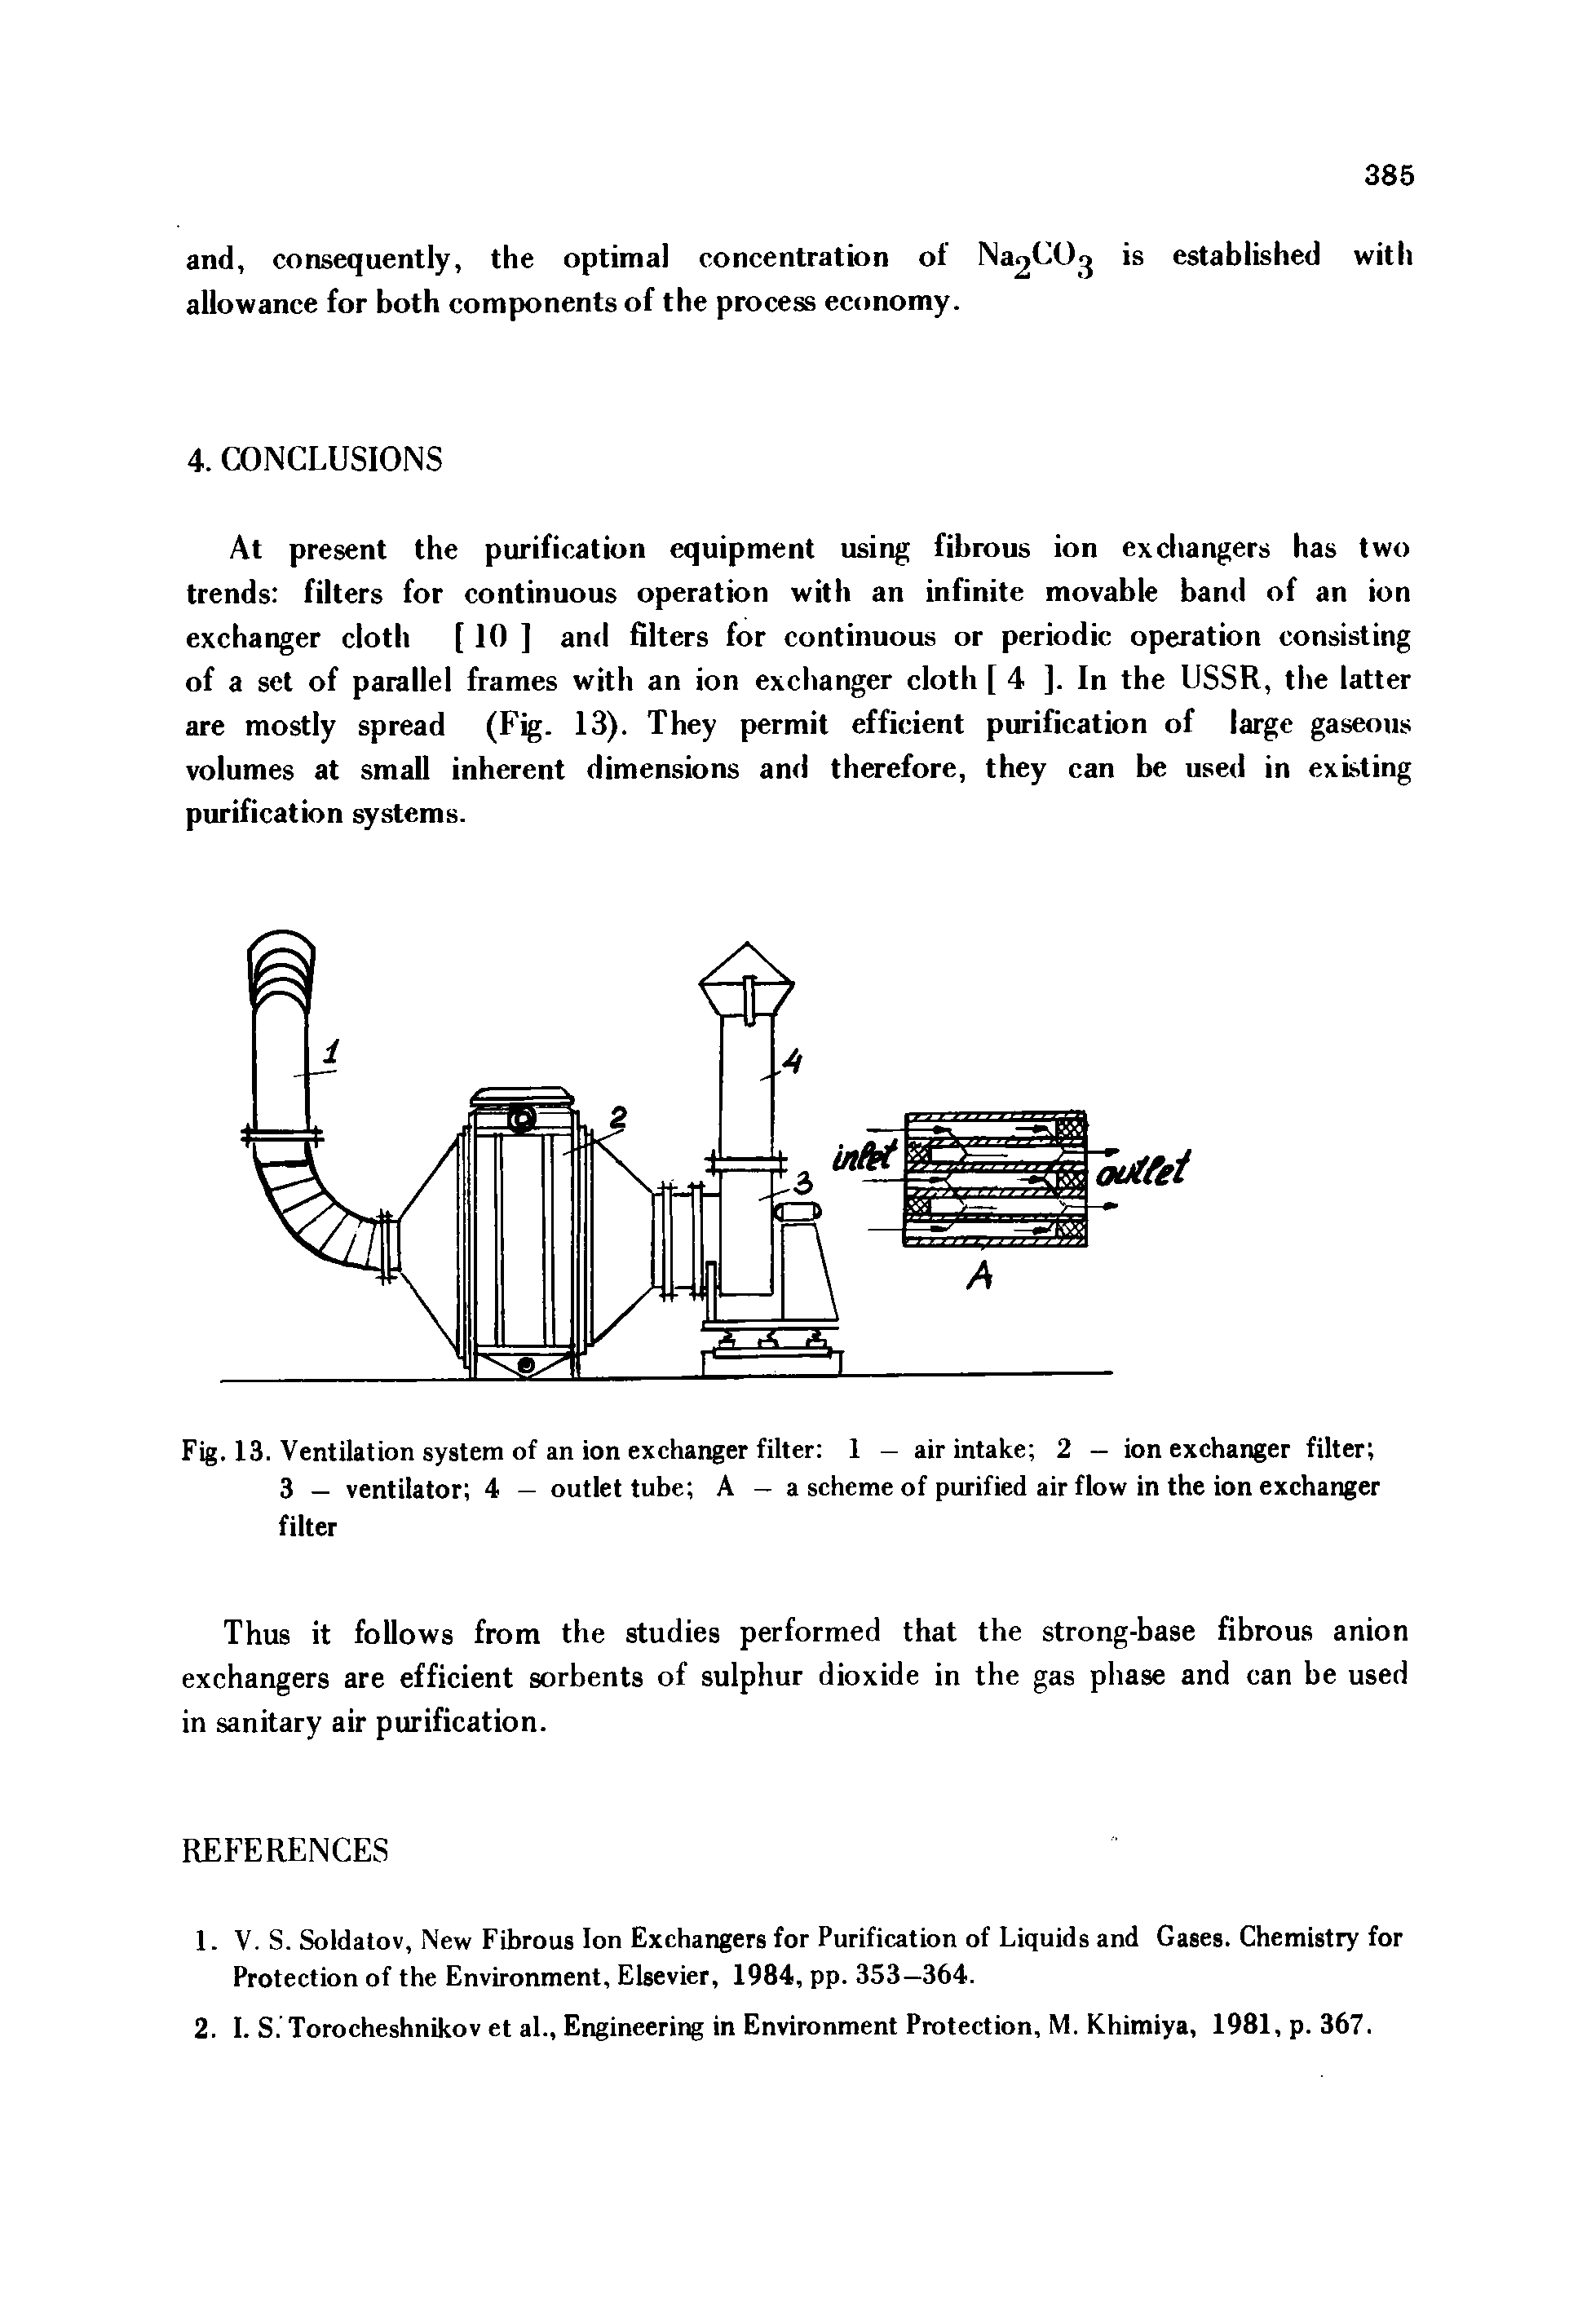 Fig. 13. Ventilation system of an ion exchanger filter 1 — air intake 2 — ion exchanger filter 3 — ventilator 4 — outlet tube A — a scheme of purified air flow in the ion exchanger filter...